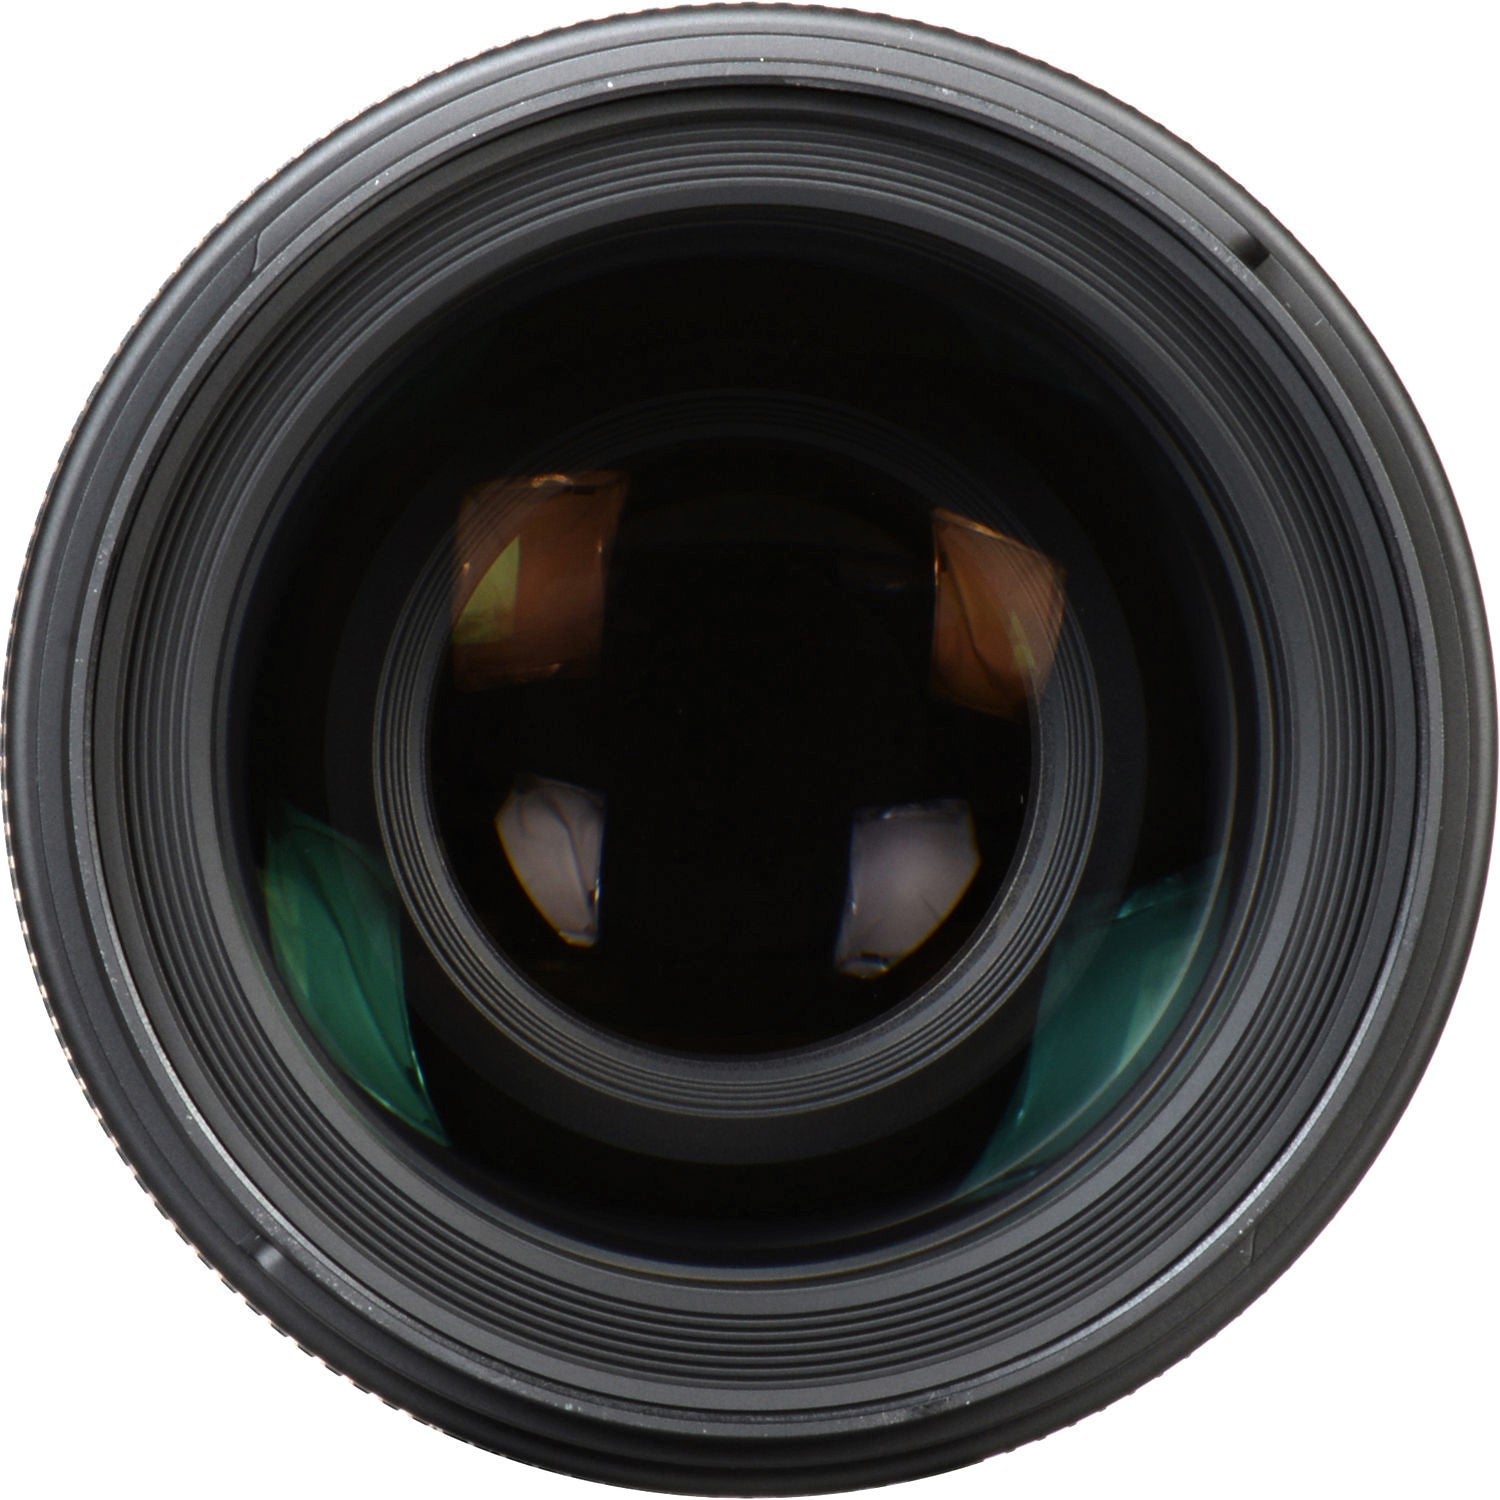 Sigma 50-100mm F1.8 DC HSM Art Lens for Nikon F in a Front Close-Up View